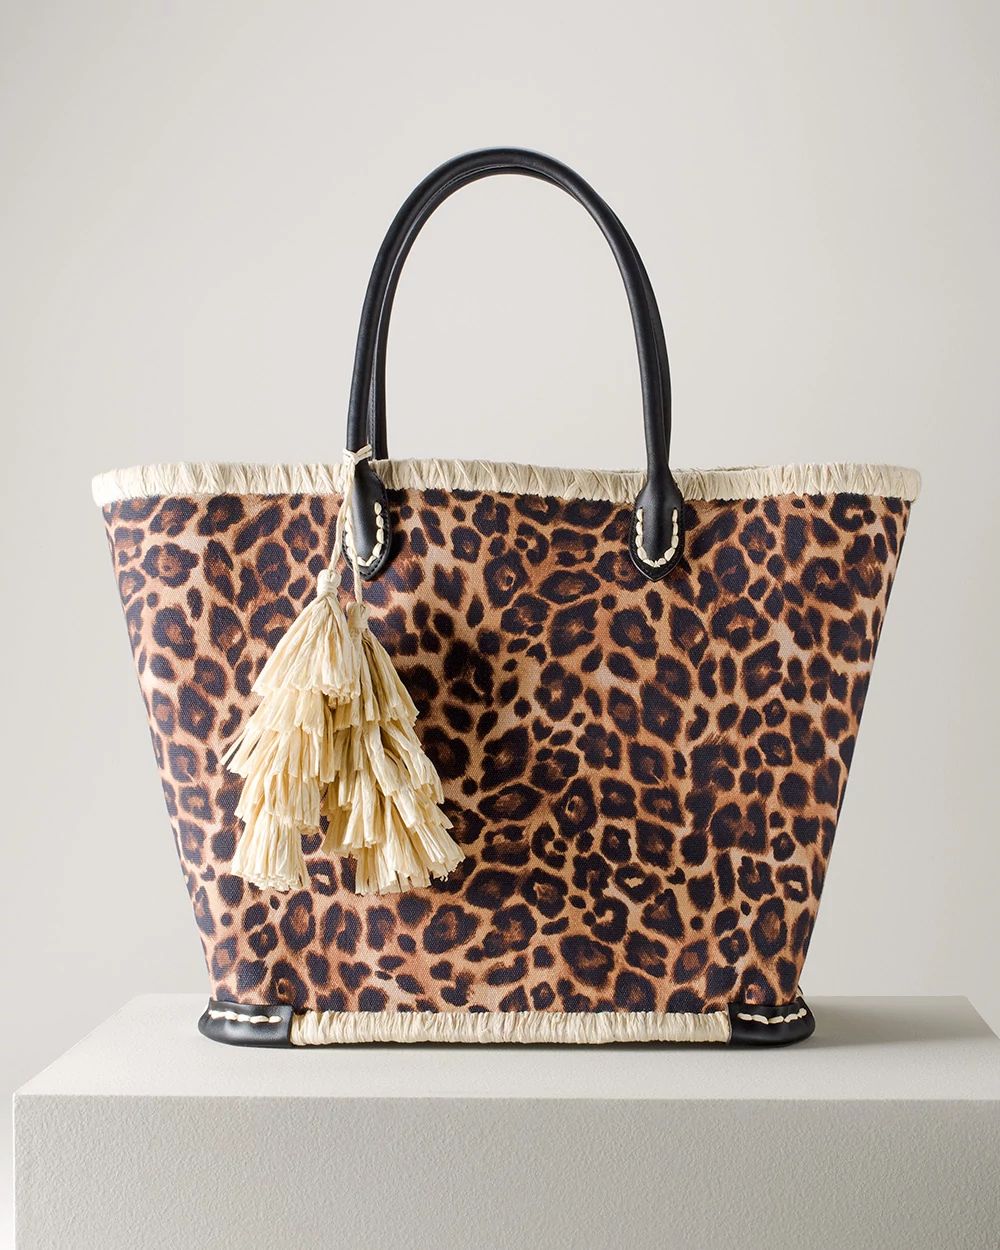 Leopard Print Tote click to view larger image.